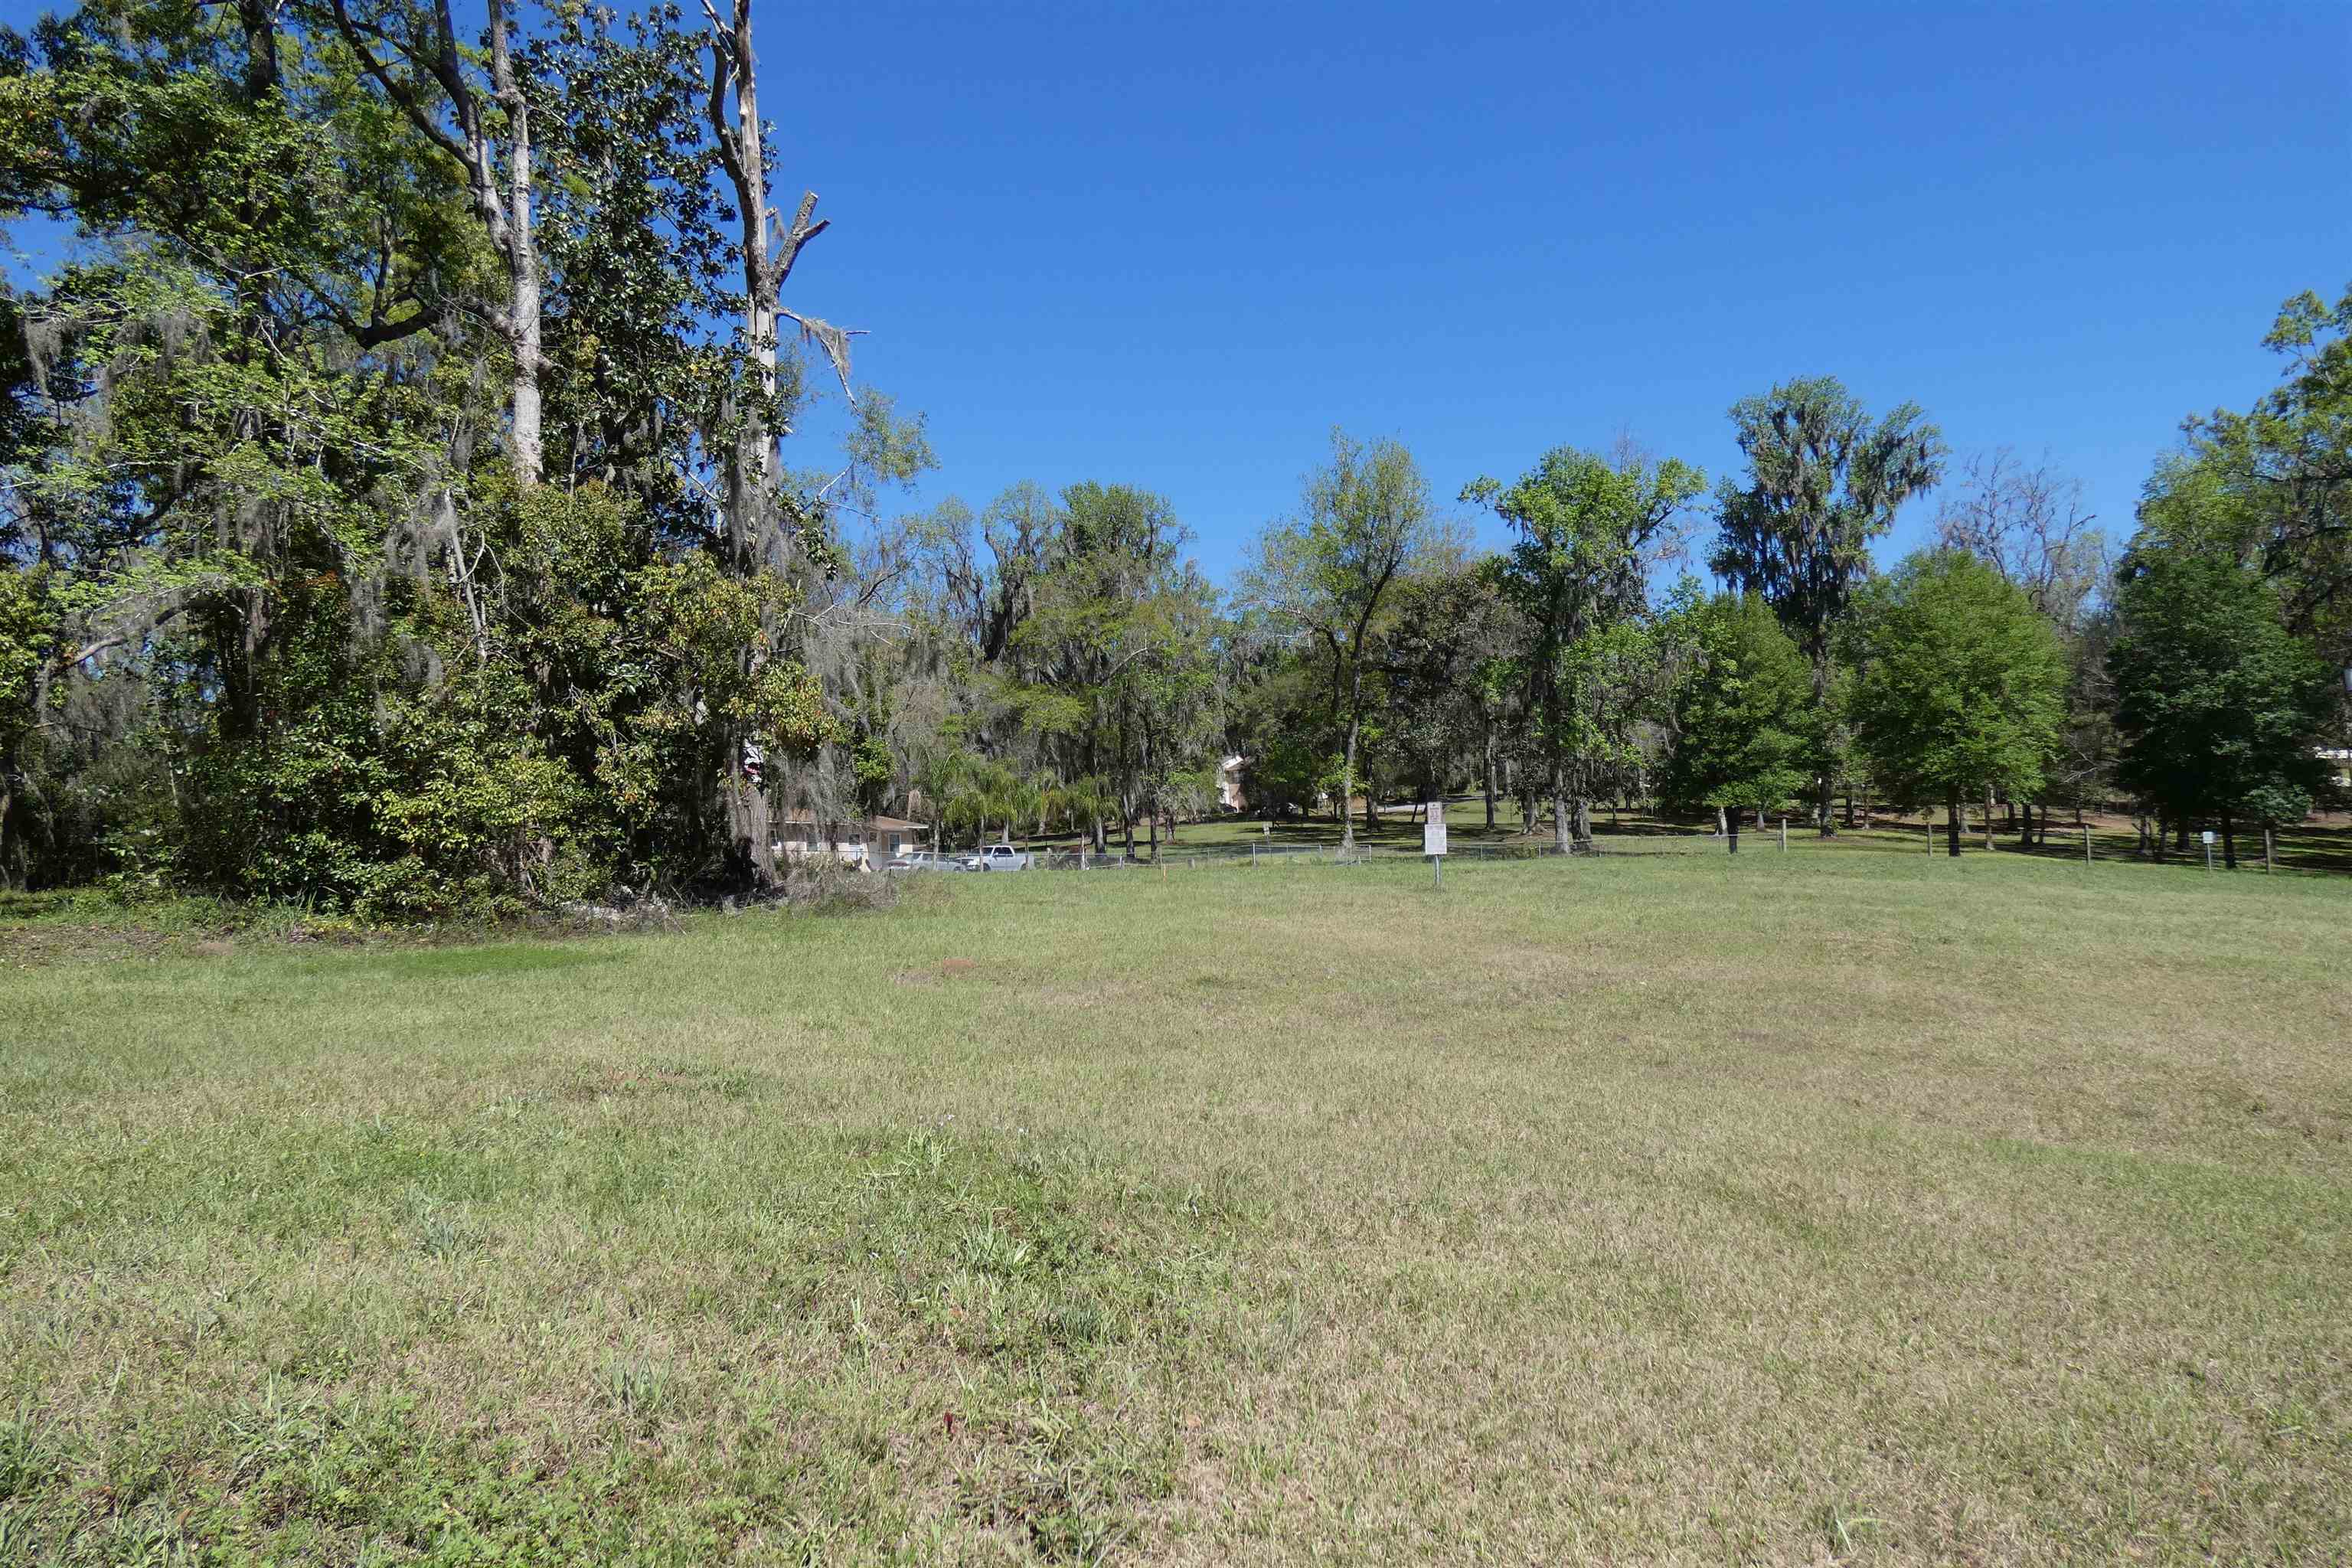 531 Marvin,TALLAHASSEE,Florida 32301,Lots and land,Marvin,343661